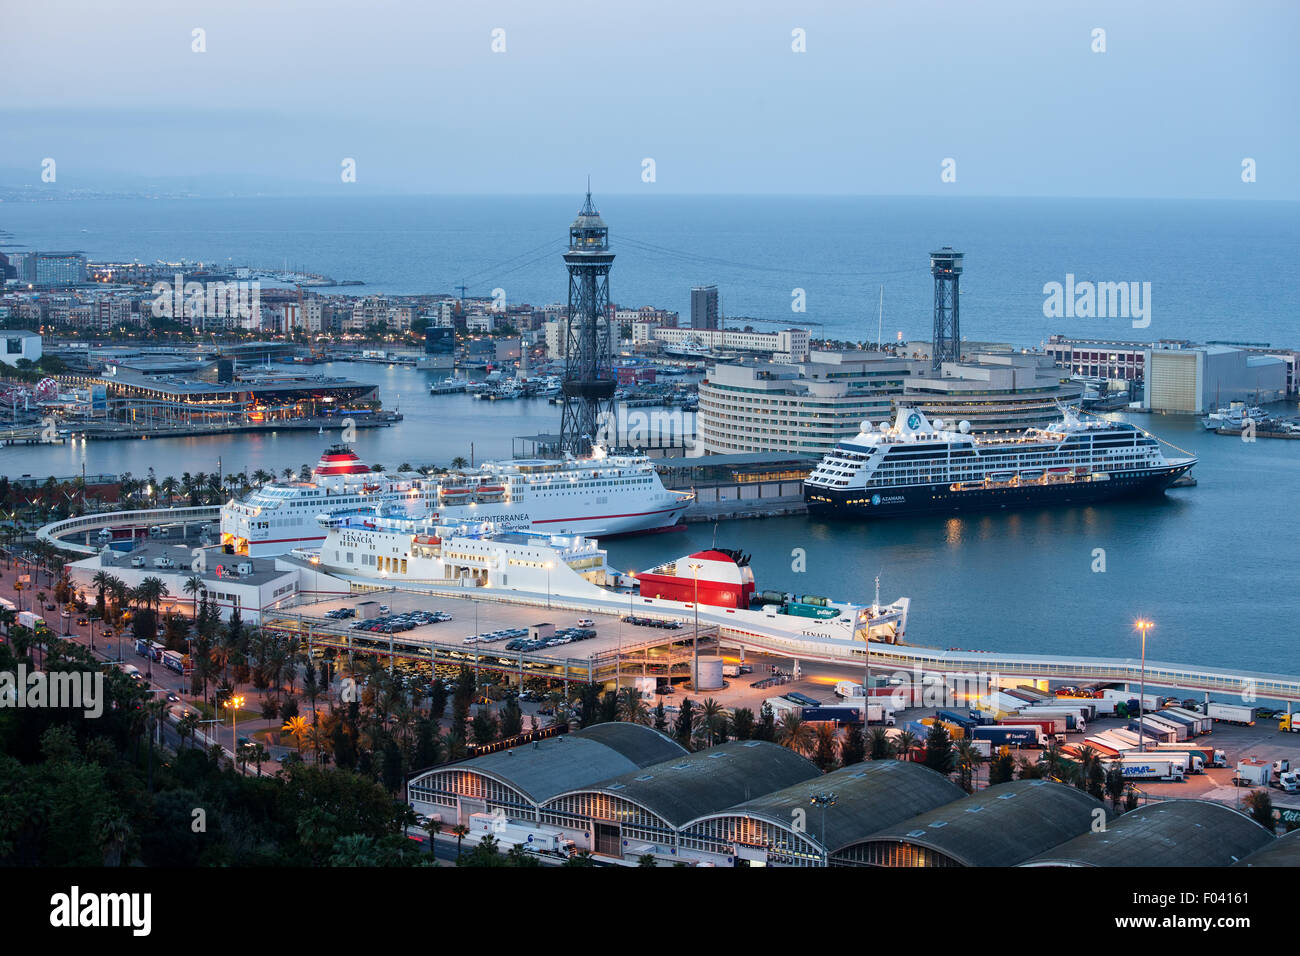 City of Barcelona in the evening, Catalonia, Spain, view over cruise ship port Stock Photo